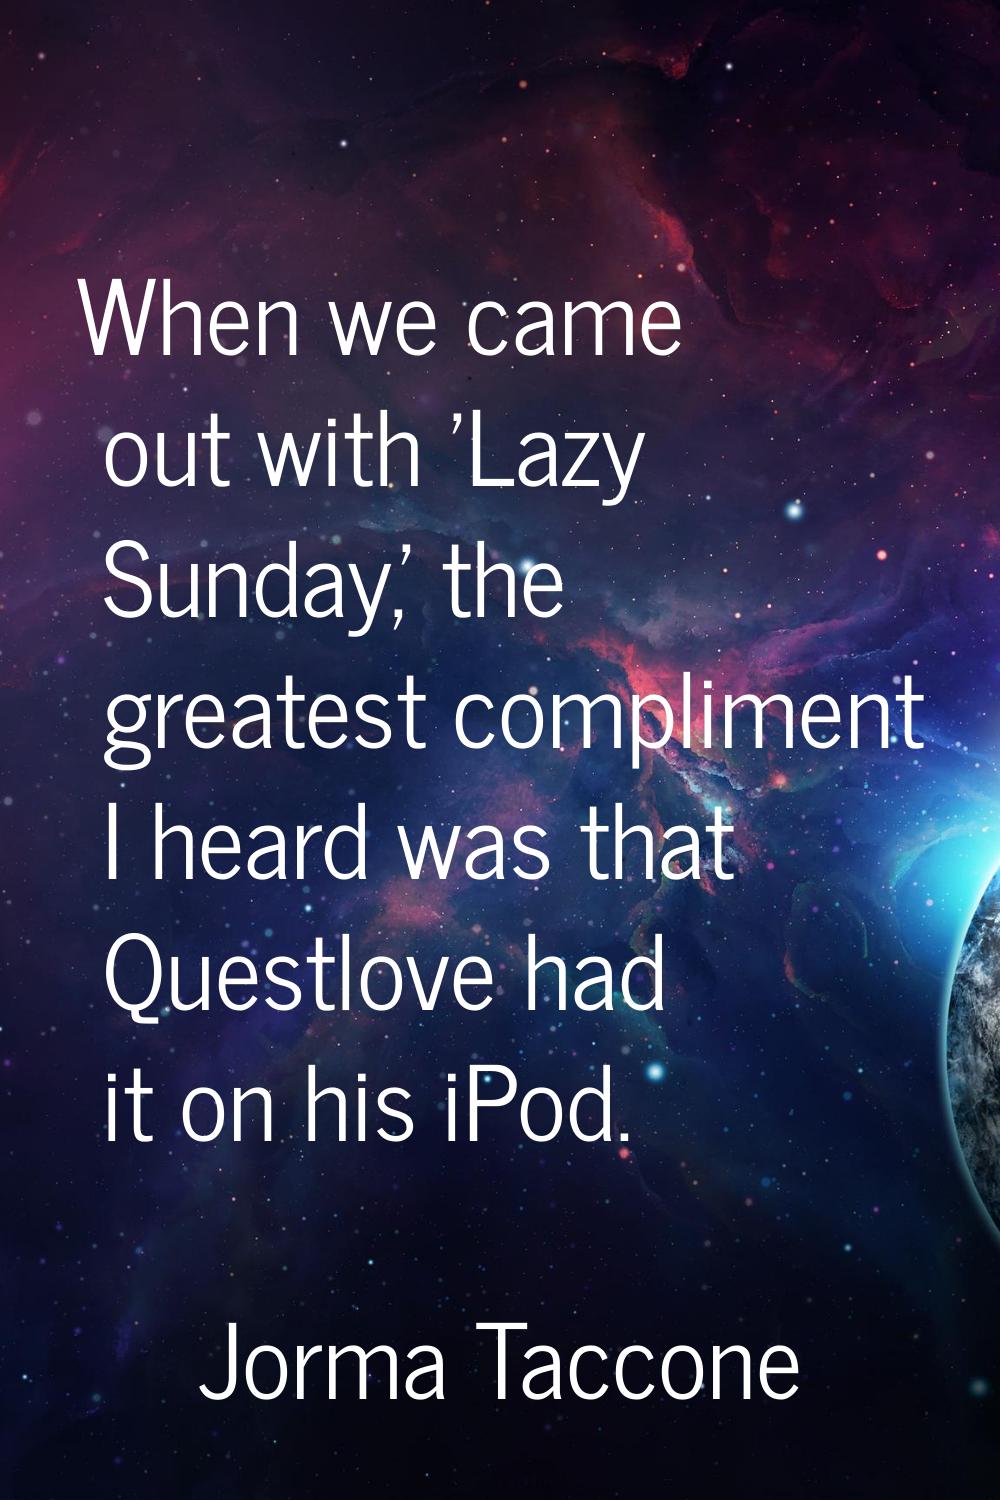 When we came out with 'Lazy Sunday,' the greatest compliment I heard was that Questlove had it on h